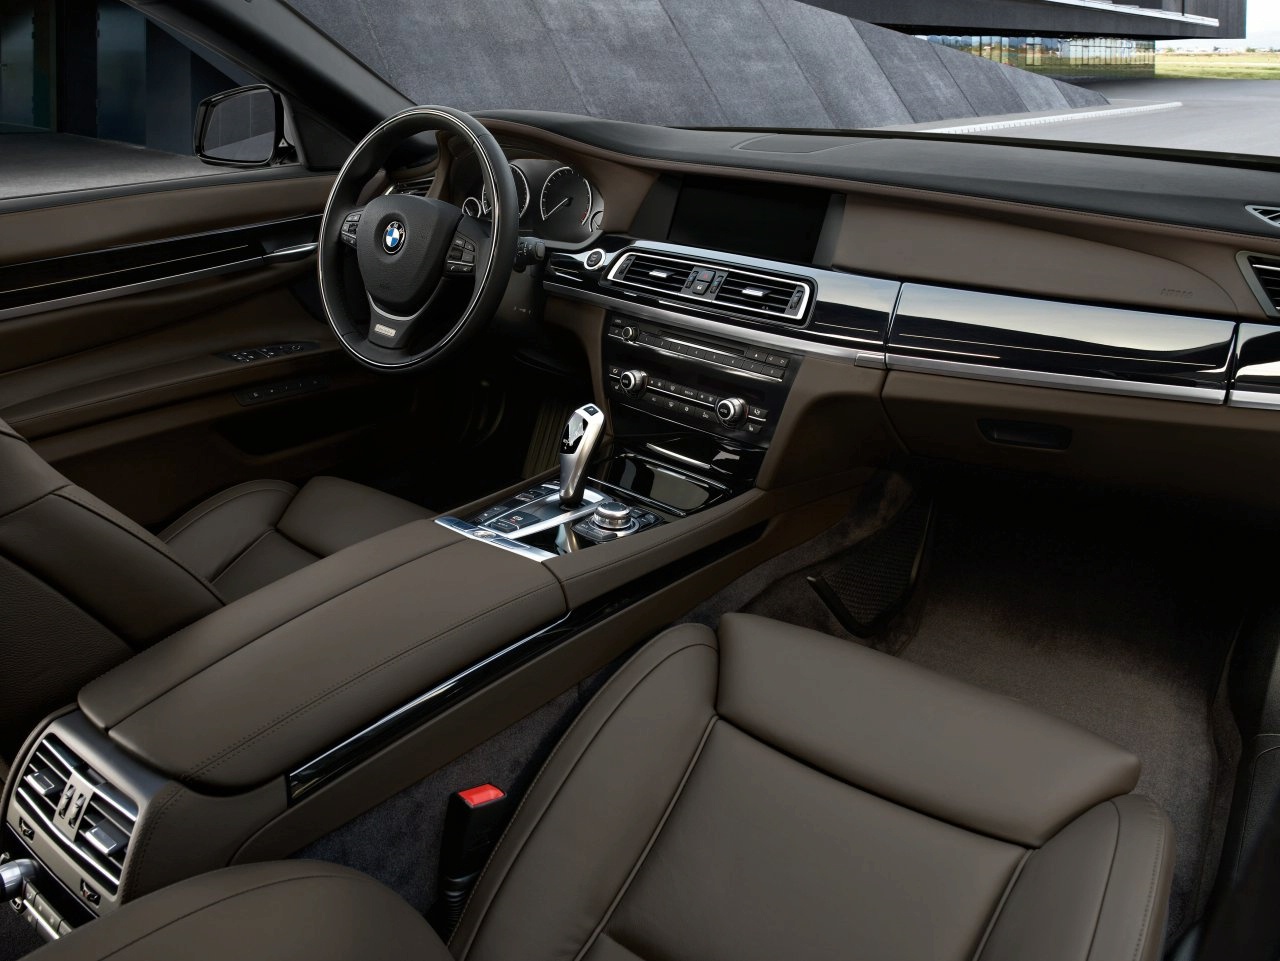 BMW 7-Series Sedan : Car Review 2012 and Pictures ~ LUXURY CARS NEVER DIE